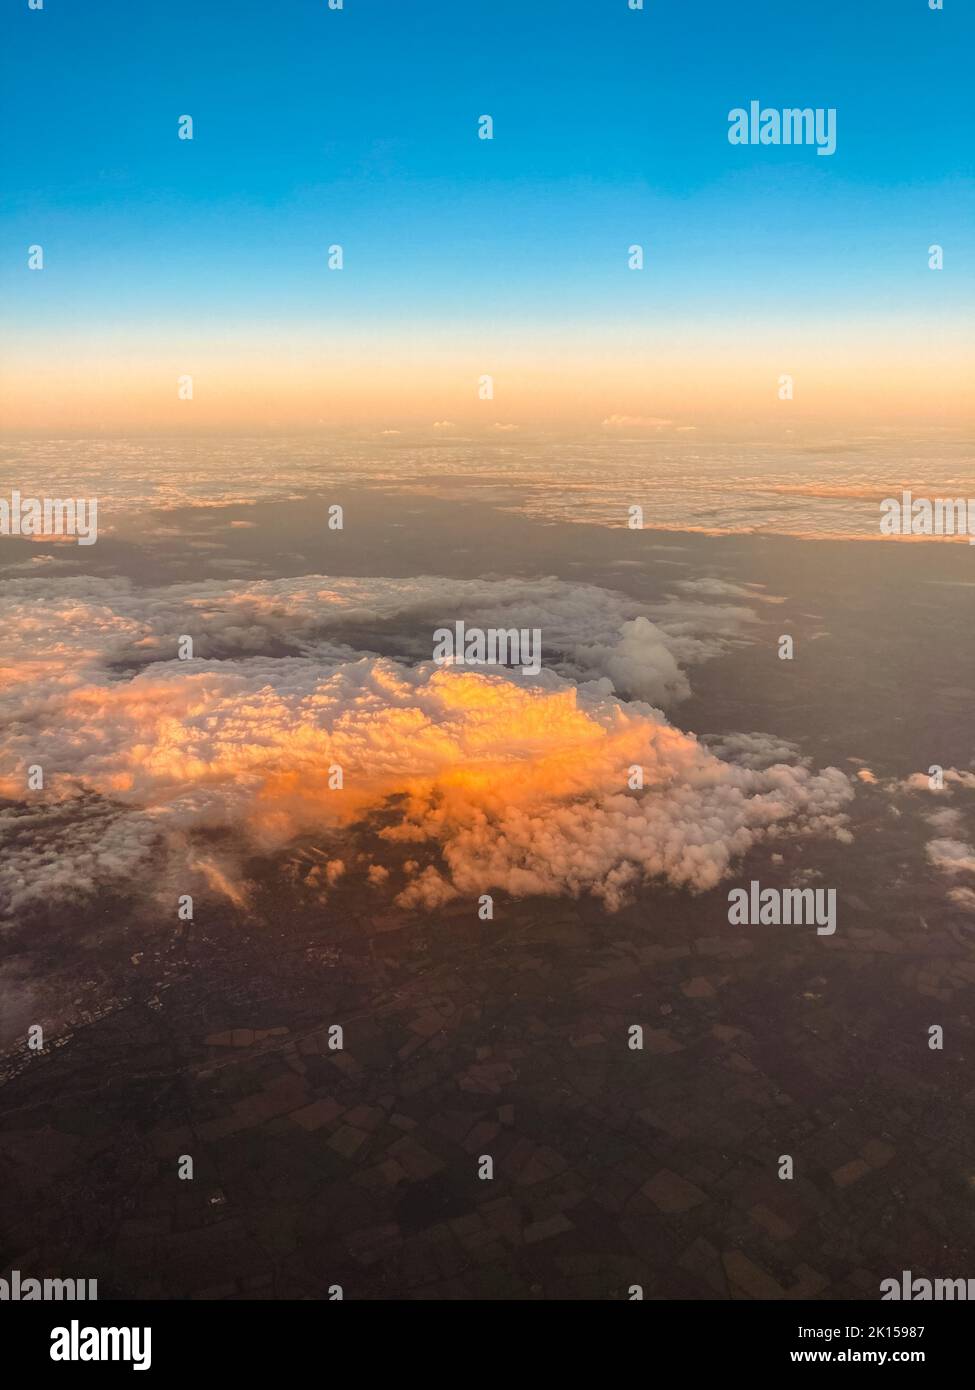 Amazing view of white fluffy clouds in sky from a plane at sunset Stock Photo